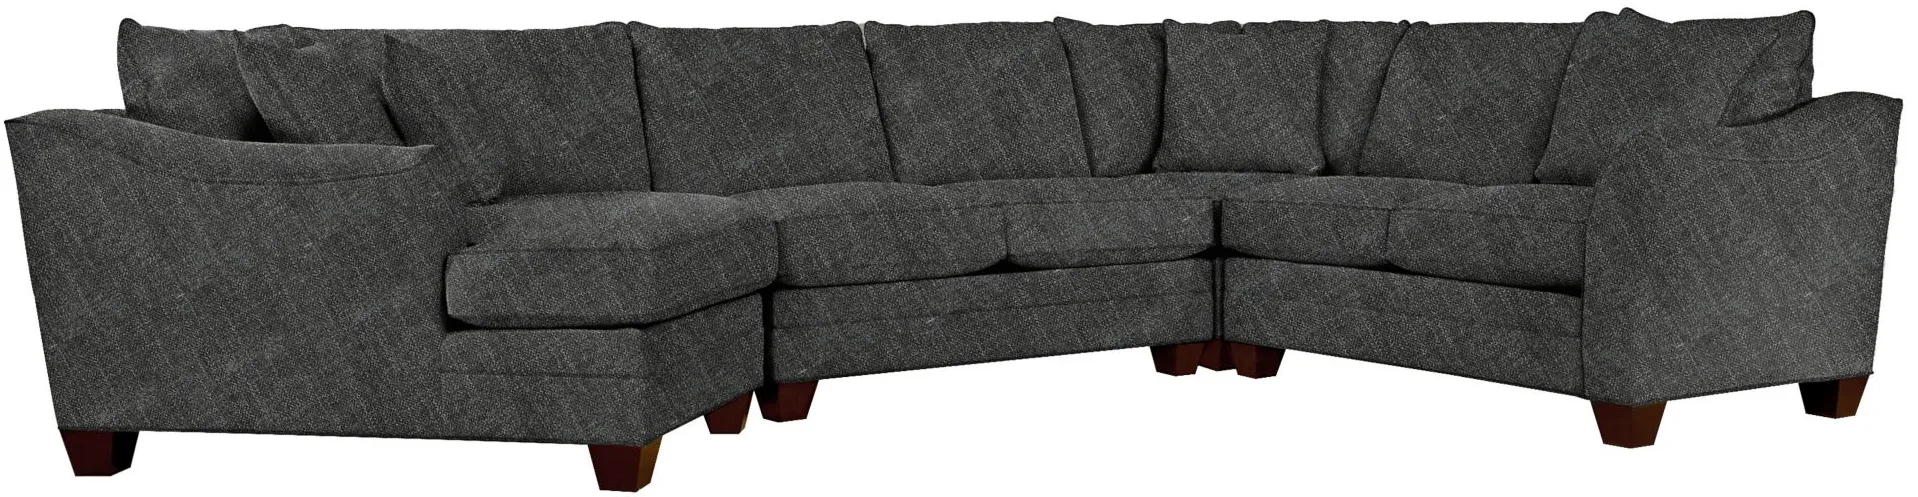 Foresthill 4-pc. Left Hand Cuddler with Loveseat Sectional Sofa in Elliot Graphite by H.M. Richards